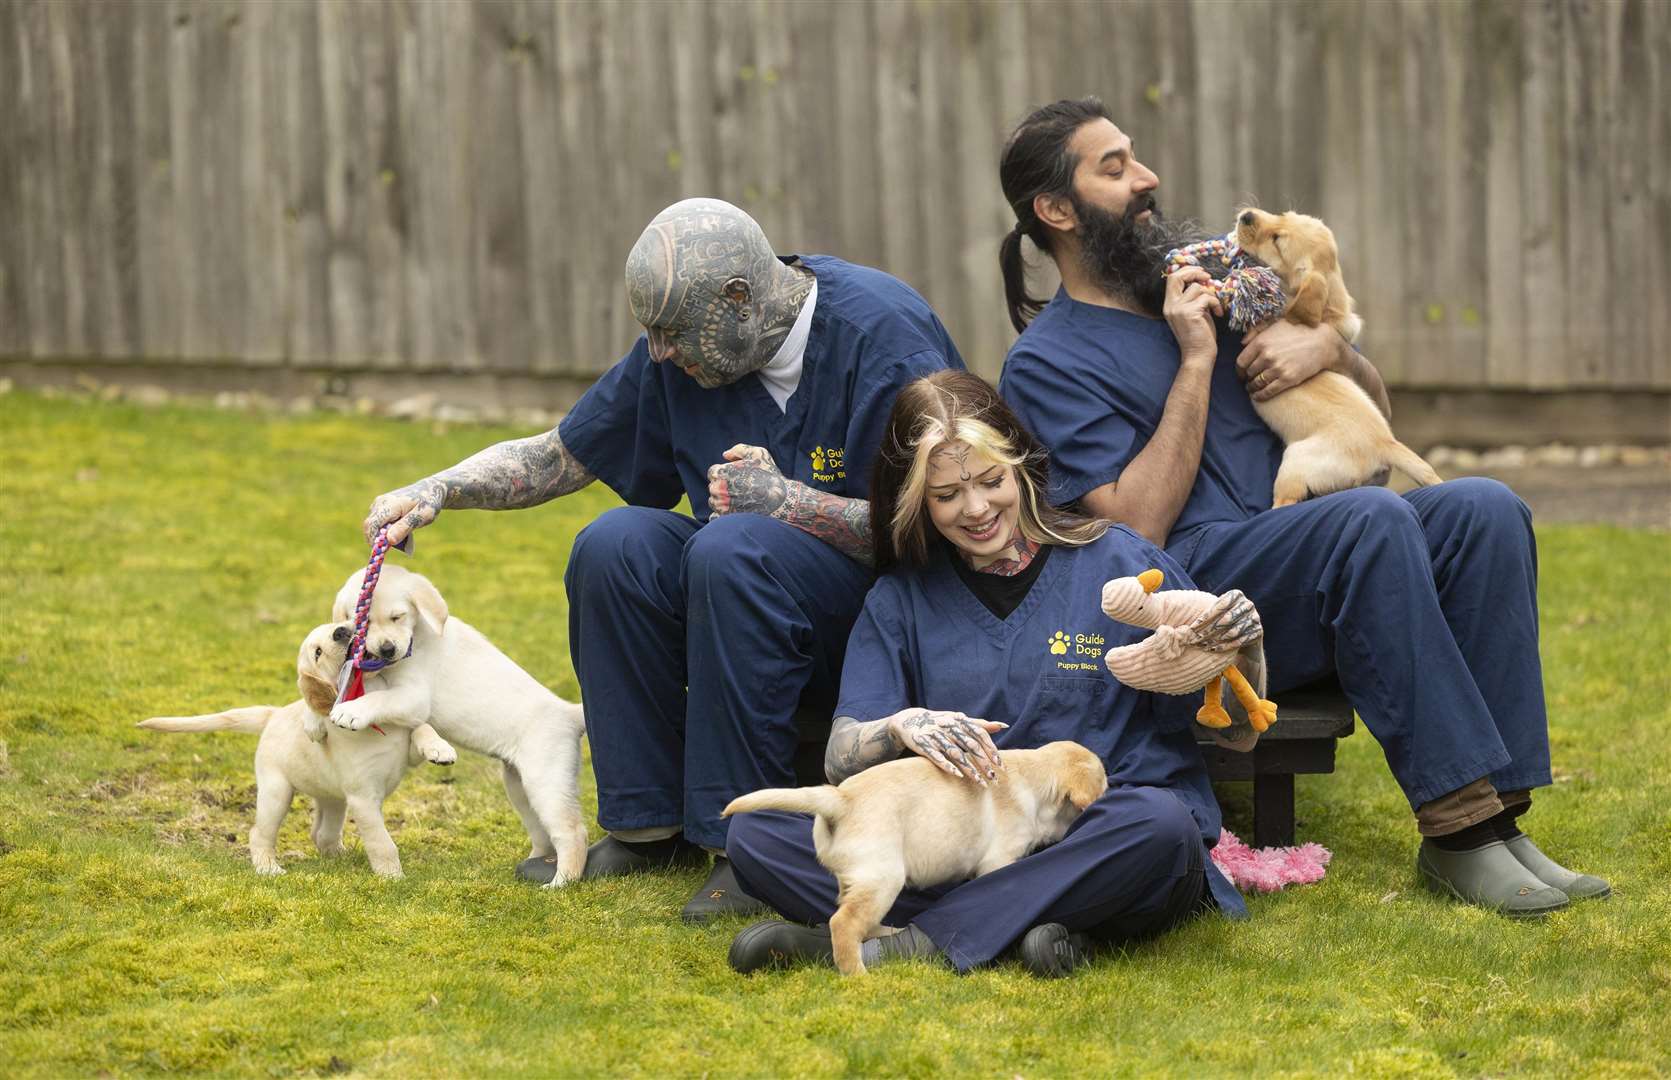 Prospective guide dogs puppies enjoy playtime and socialisation with Keith, Suki and Ket (Fabio De Paola/PA)